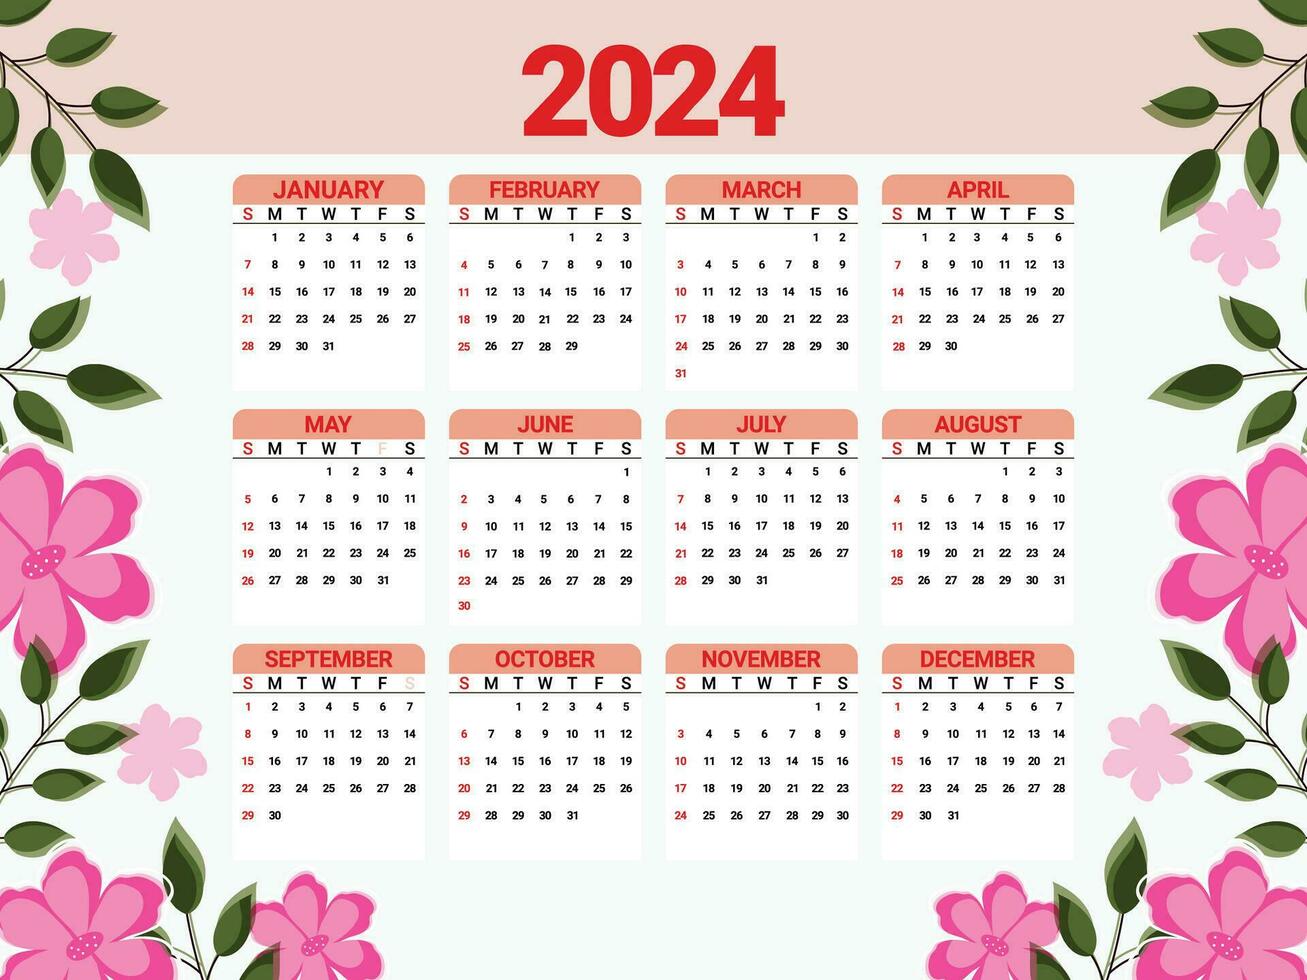 Calendar of 2024 with floral background vector